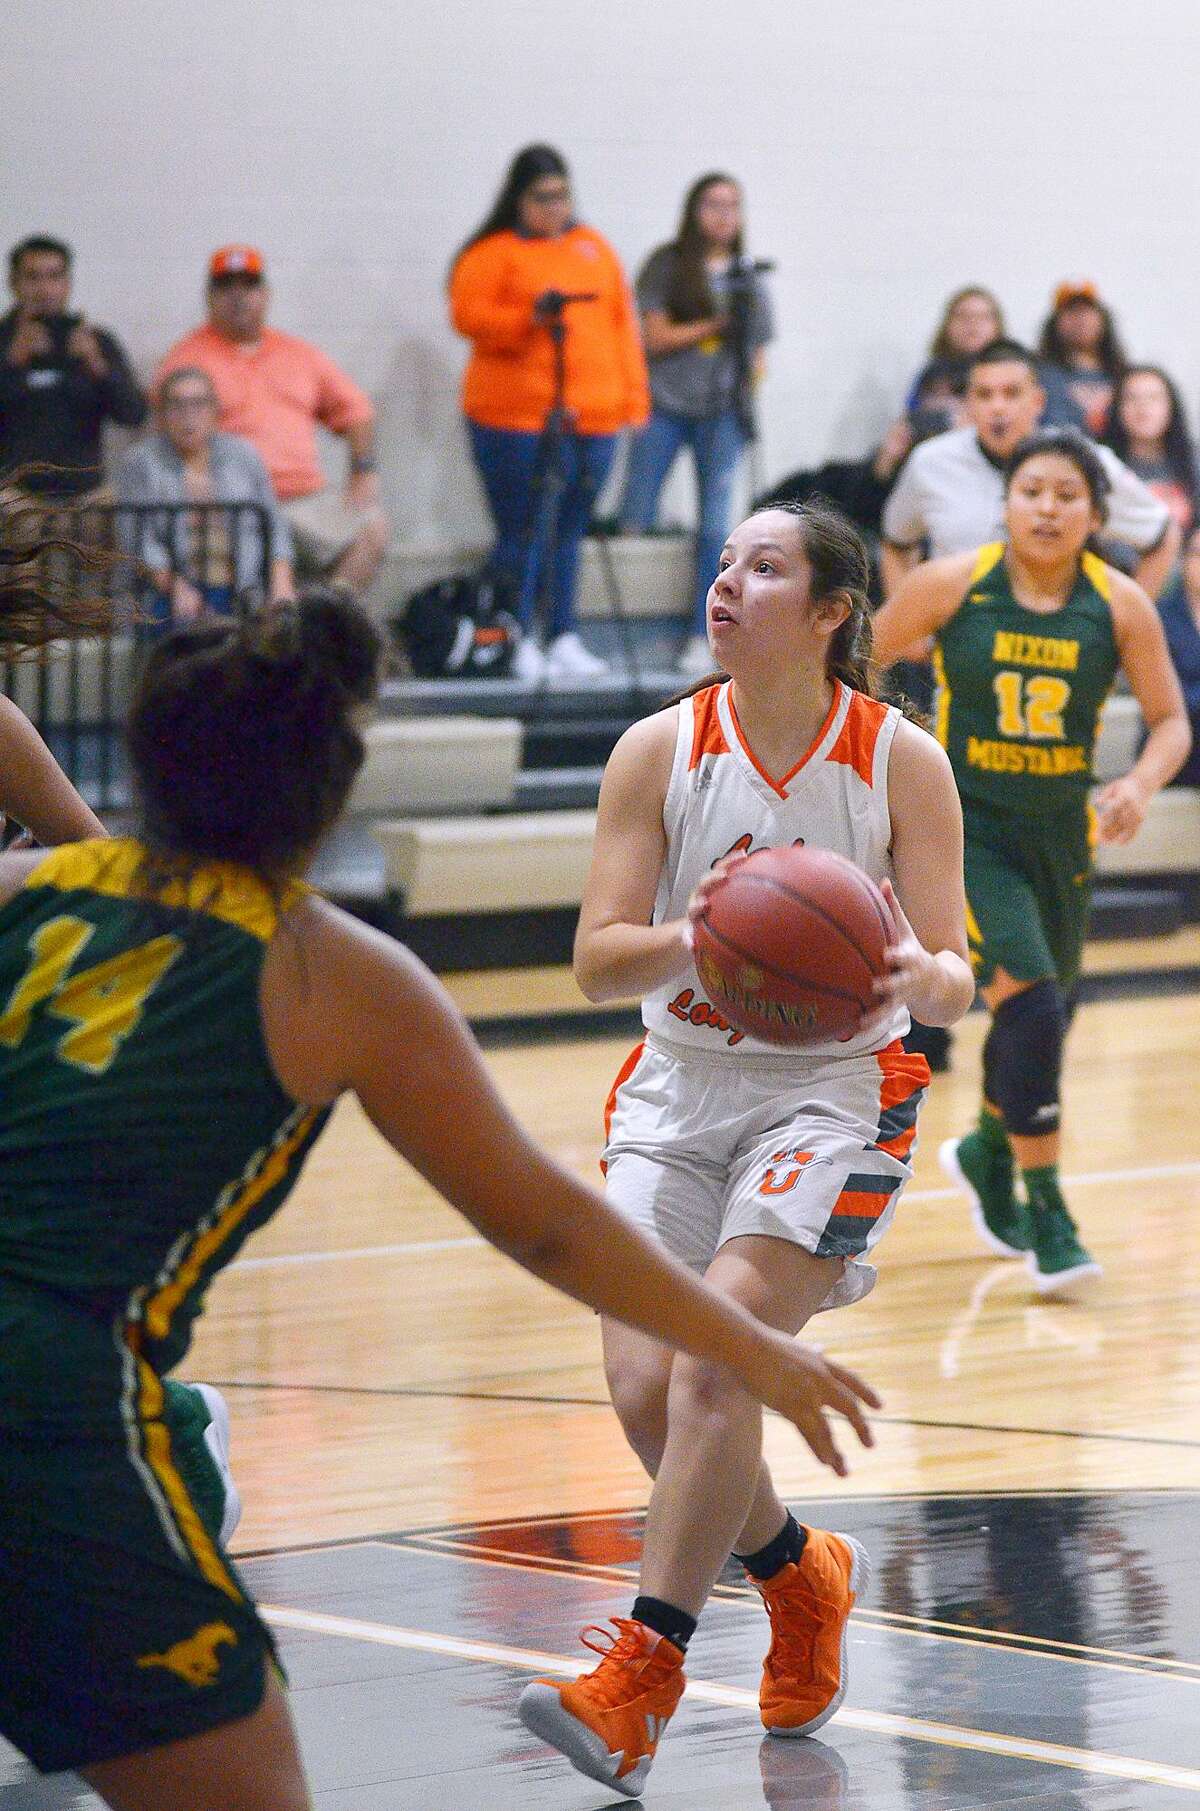 Natalia Trevino scored 39 points in two games Friday as United advanced to the Gold Bracket semifinals of the UISD Hoopfest after beating Nixon and Victoria West. They are one of two remaining unbeaten local teams along with United South.